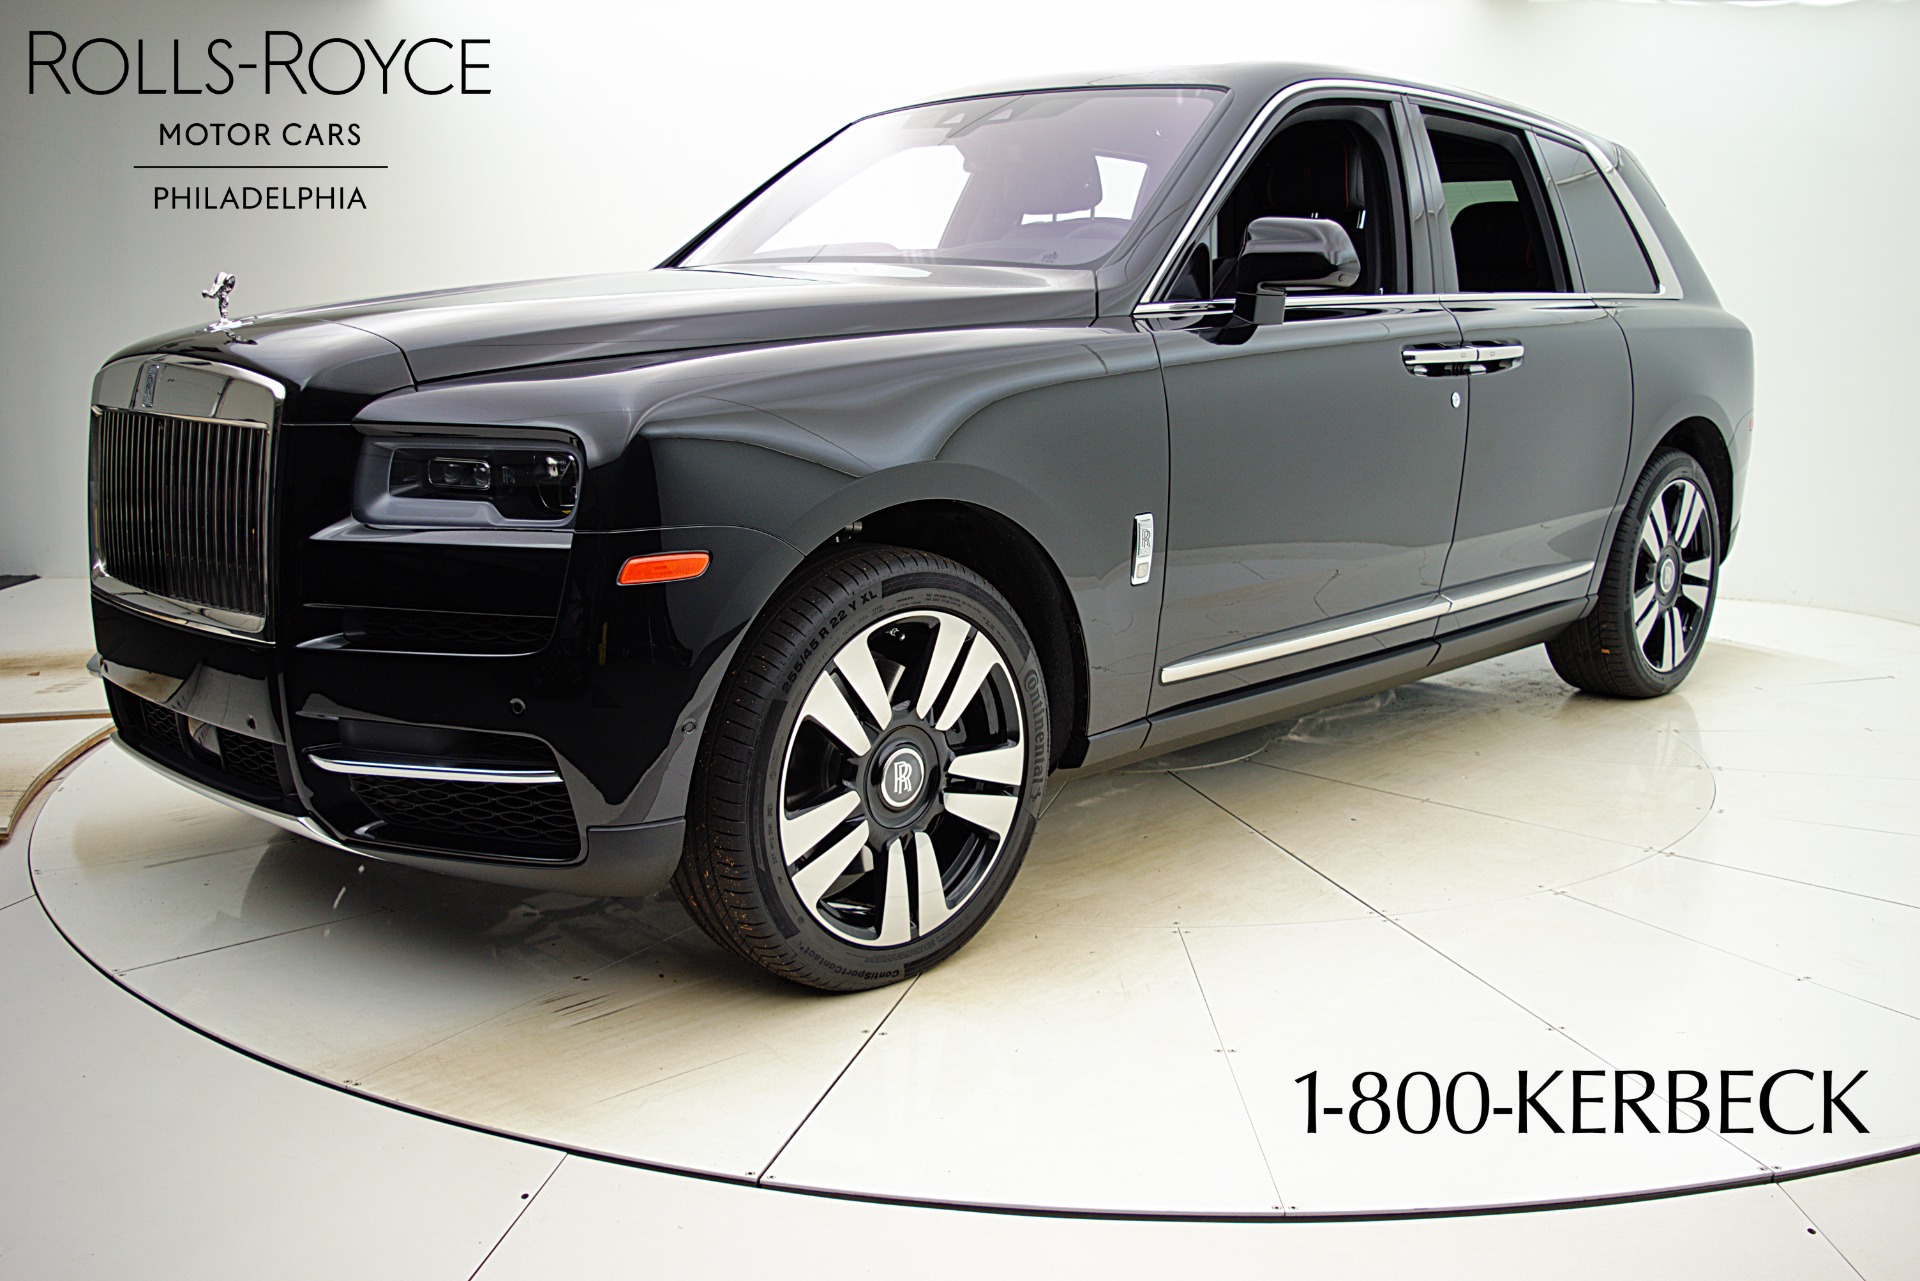 Used 2022 Rolls-Royce Cullinan / LEASE OPTIONS AVAILABLE for sale $425,000 at Bentley Palmyra N.J. in Palmyra NJ 08065 2